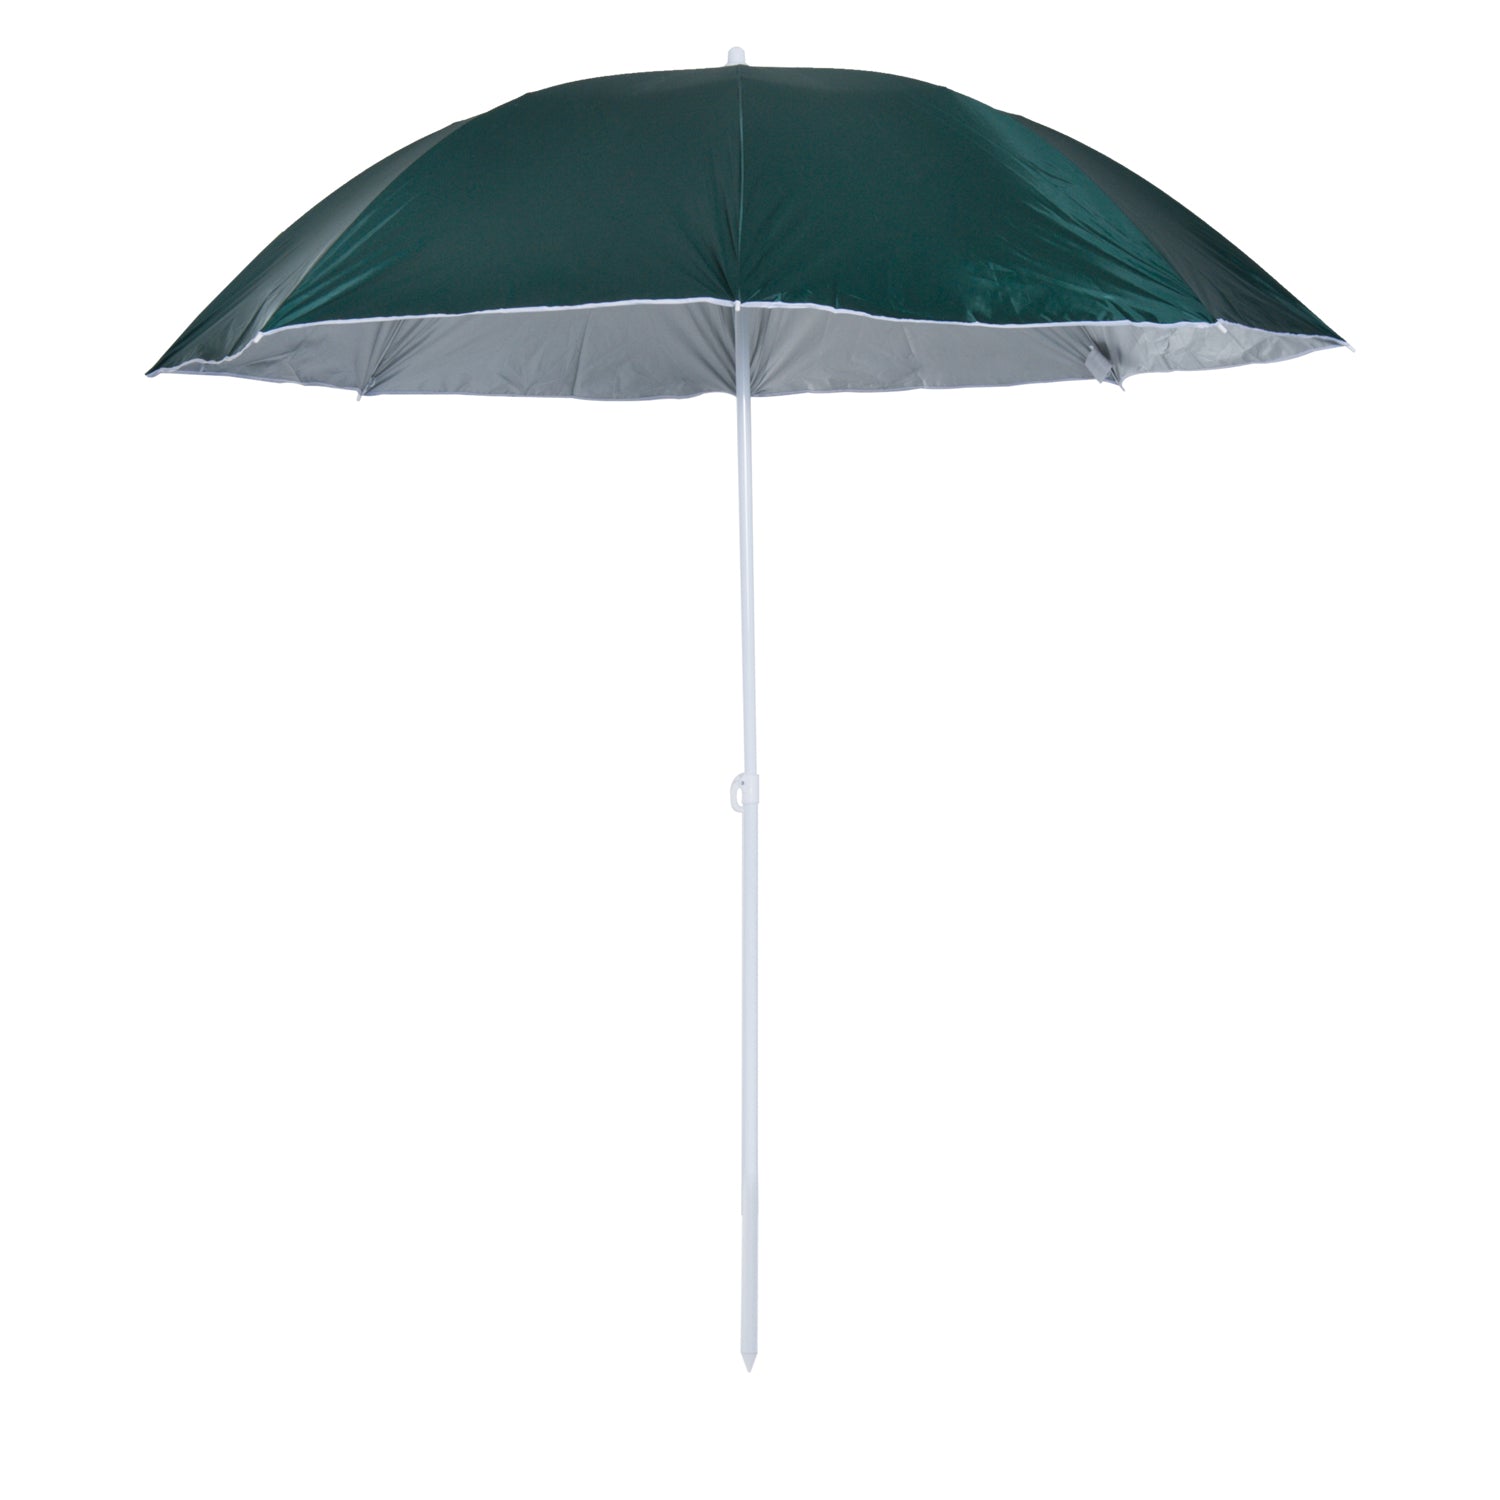 Outsunny 2m Beach Parasol Fishing Umbrella Brolly with Sides and Push –